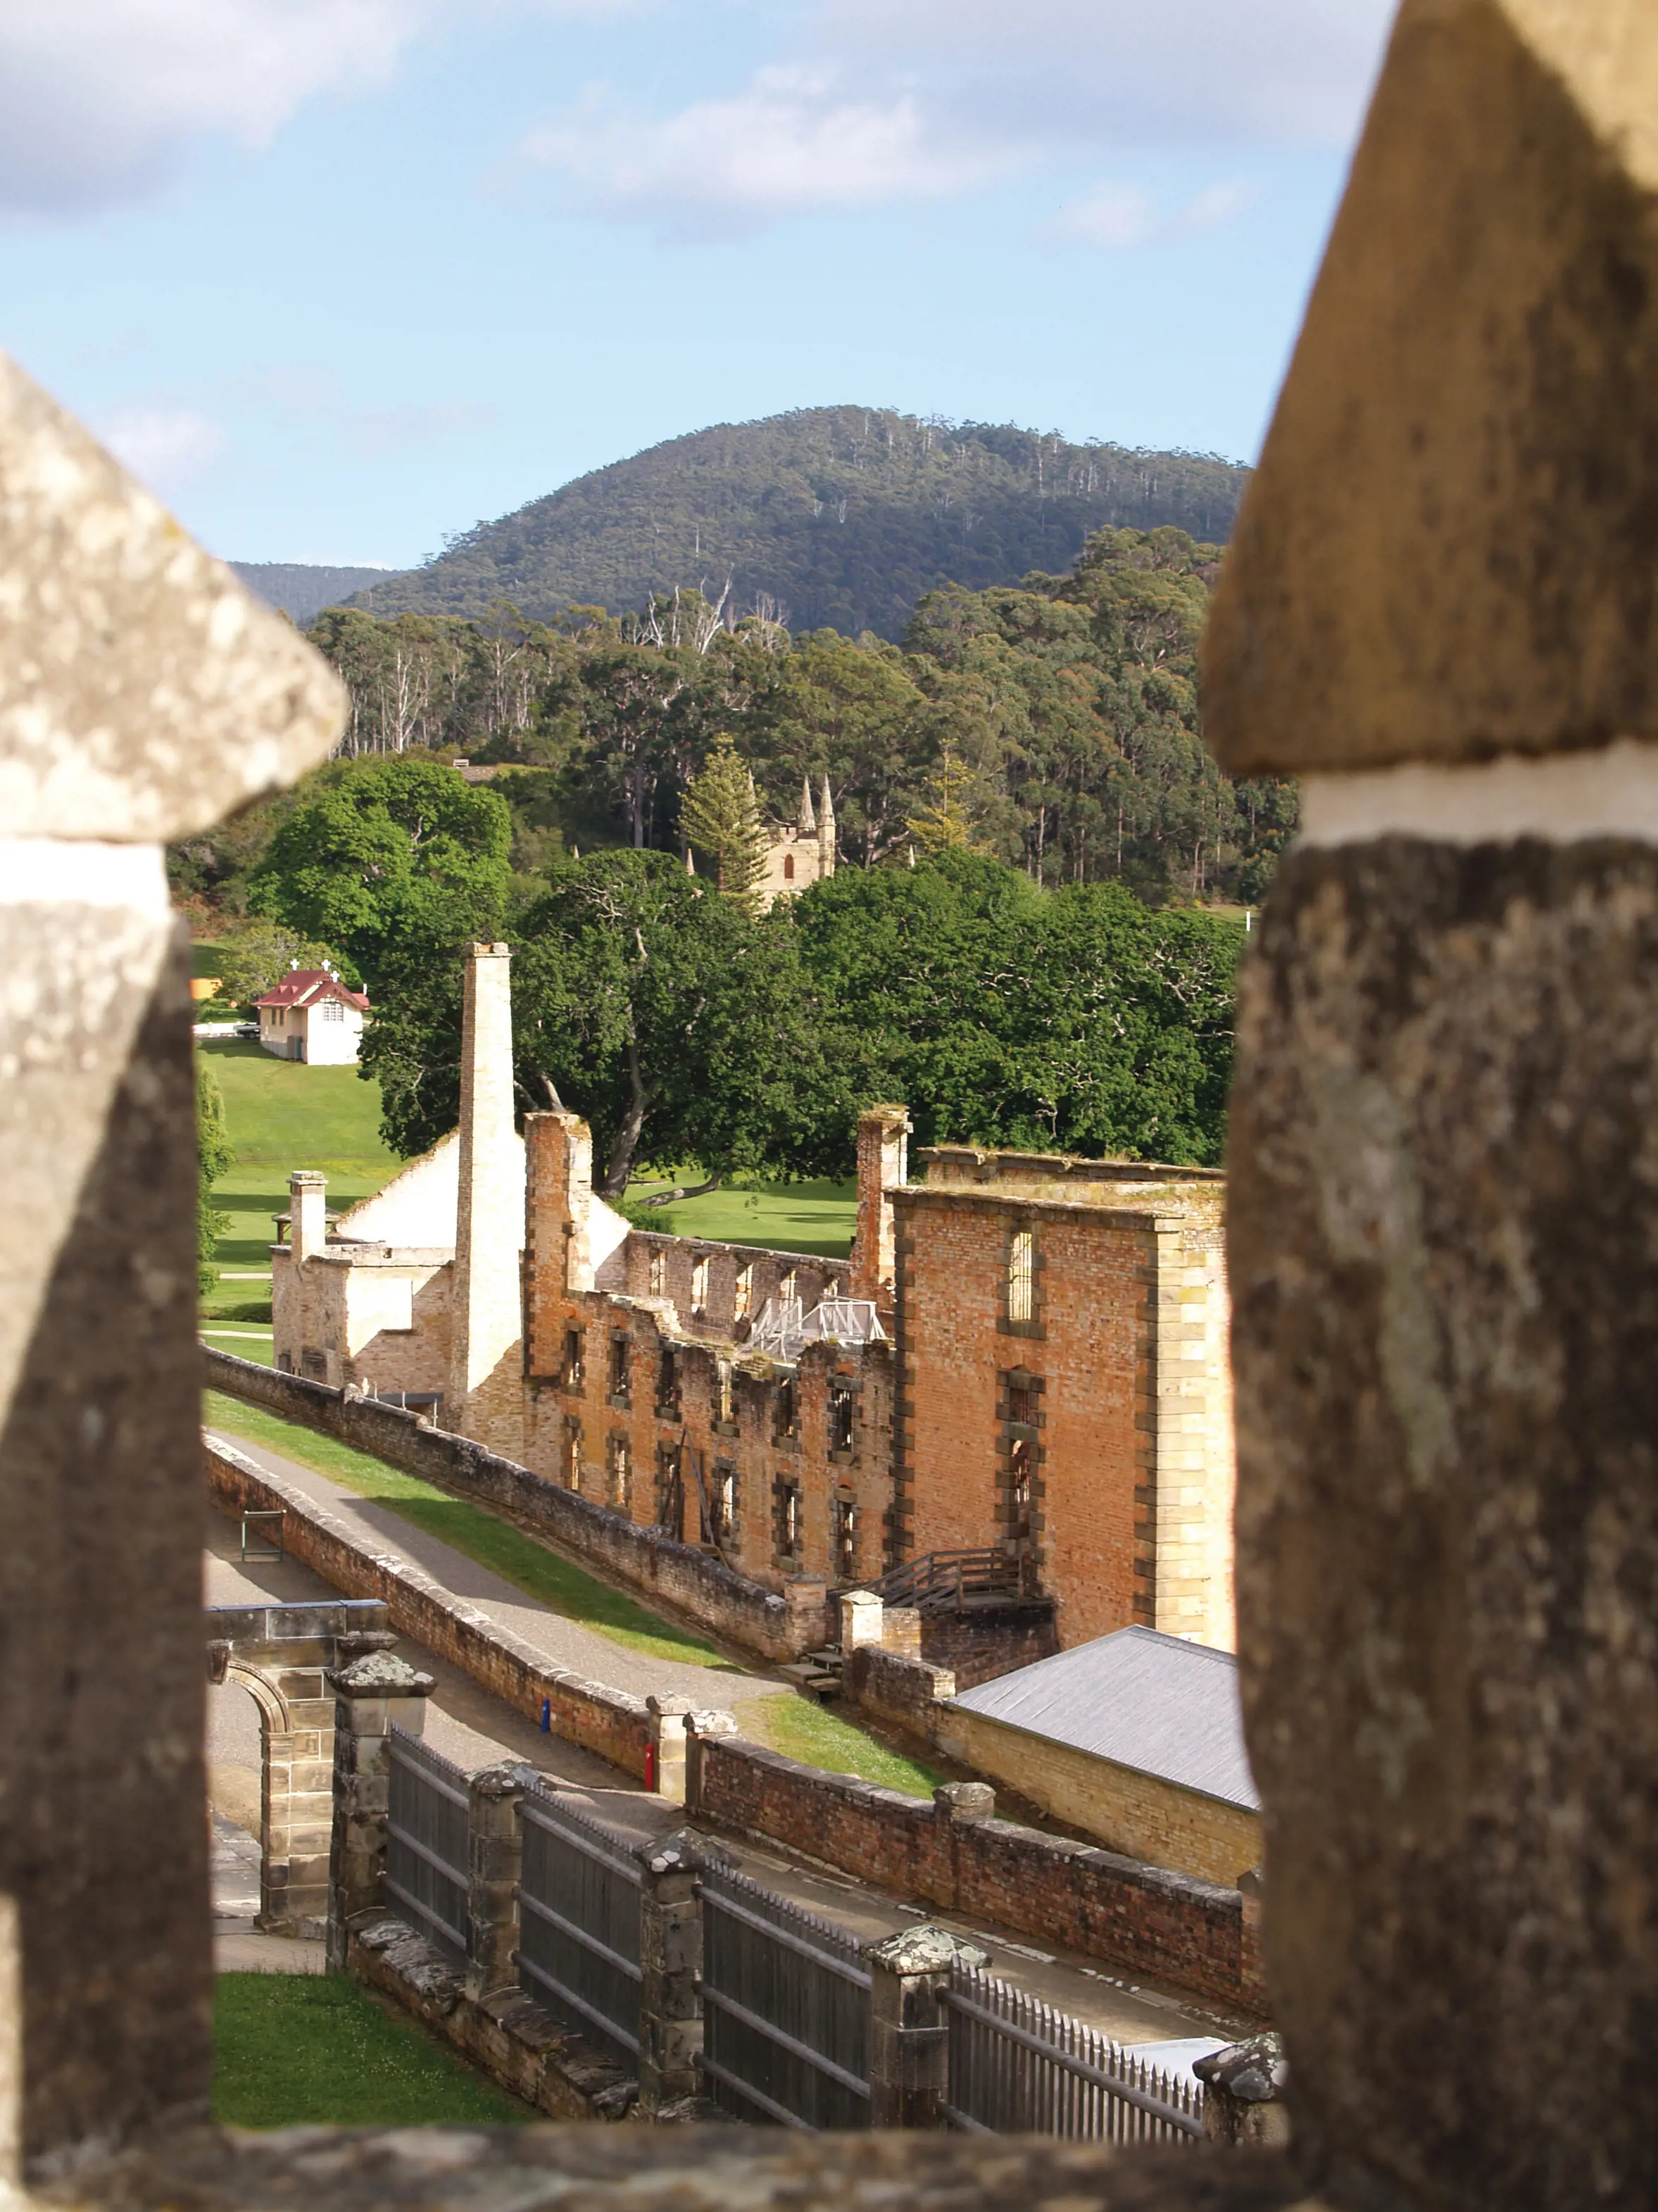 Looking towards the Penitentiary - Port Arthur Historic Site